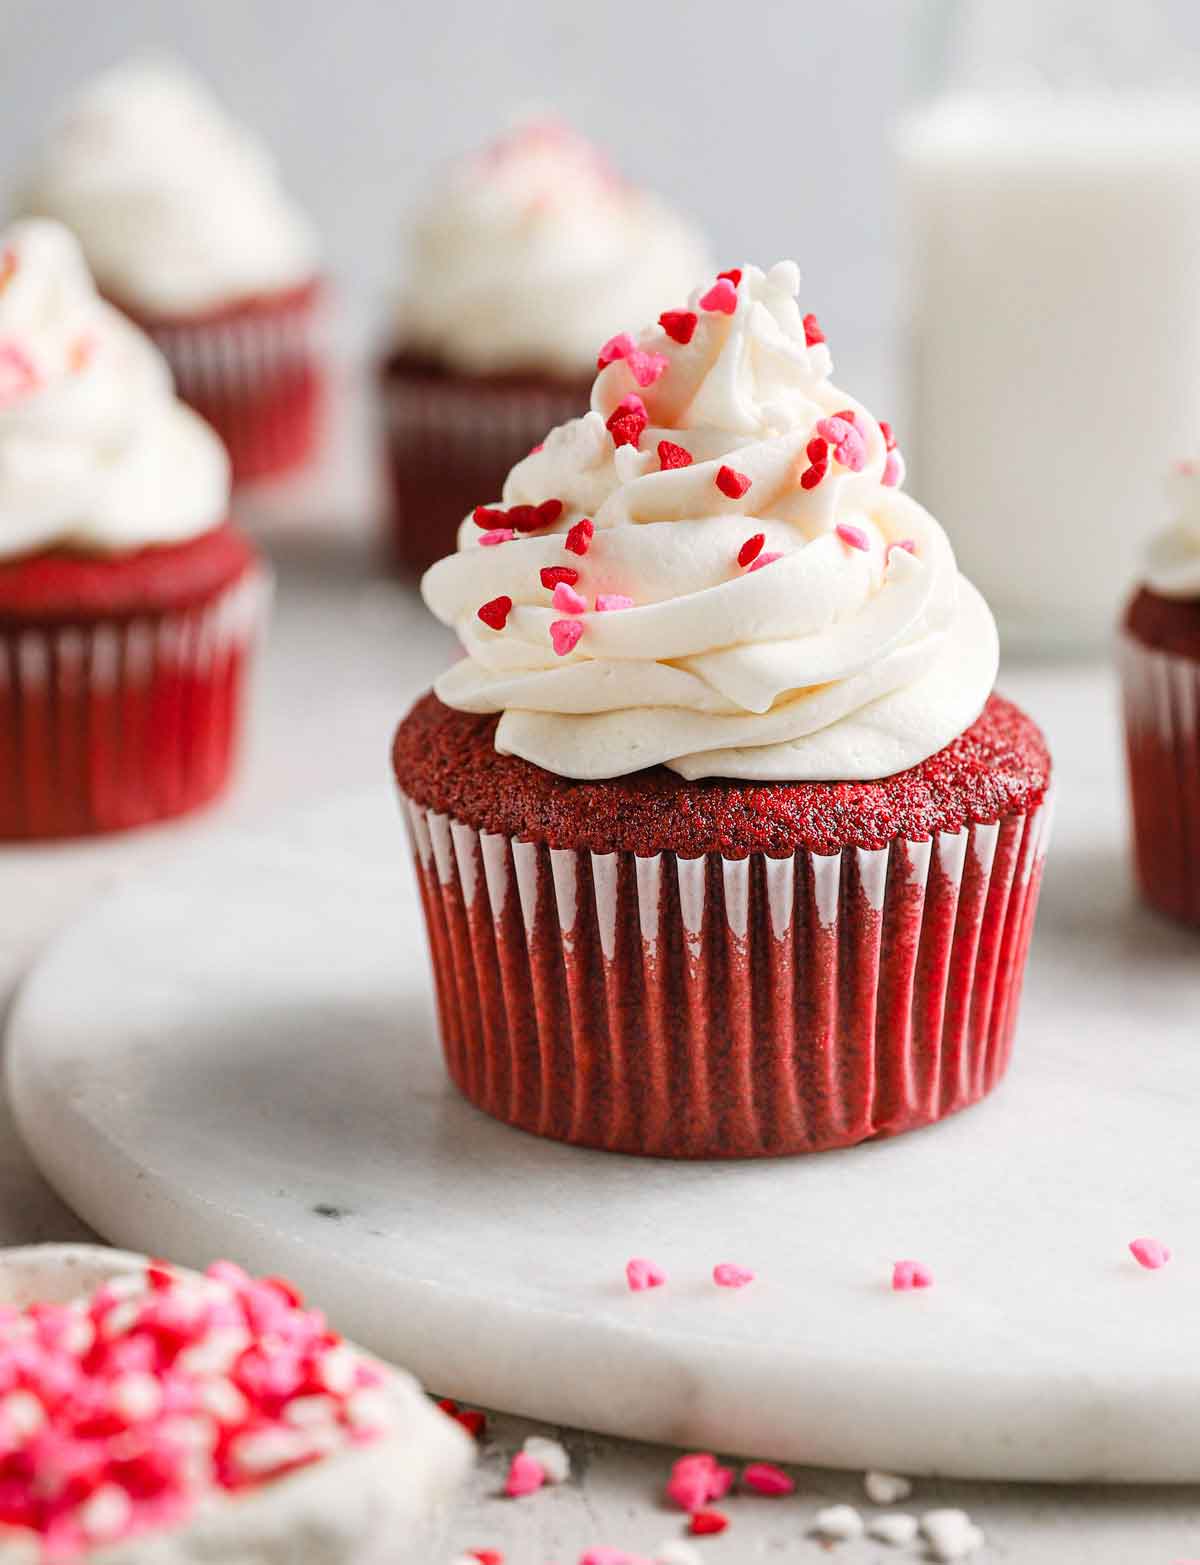 Red velvet cupcake with cream cheese frosting and red and pink heart sprinkles.